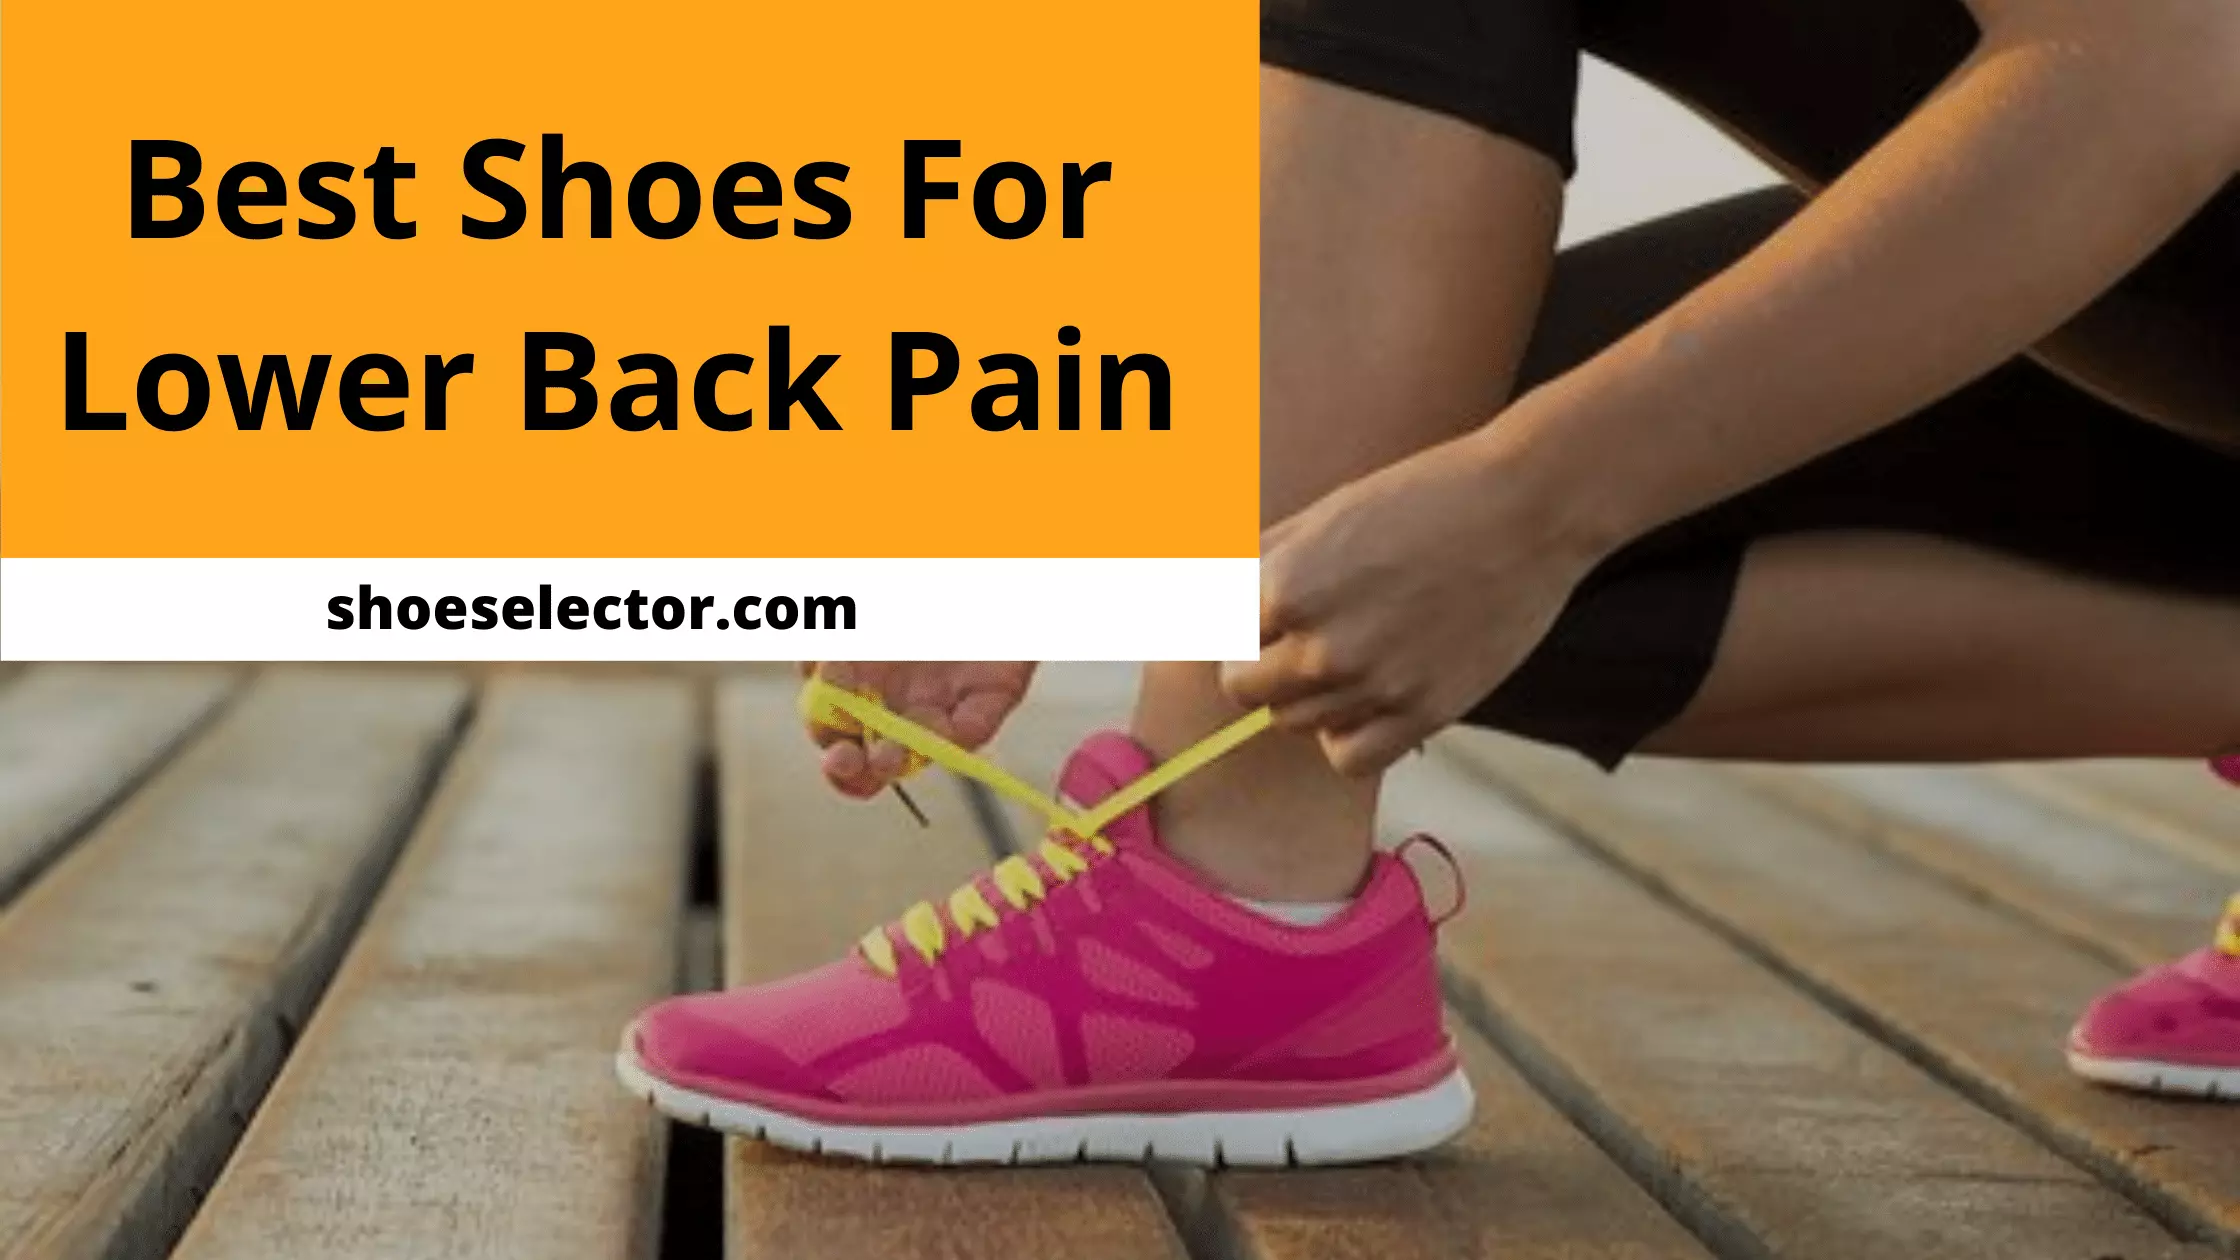 Best Shoes For Lower Back Pain - Comprehensive Guide